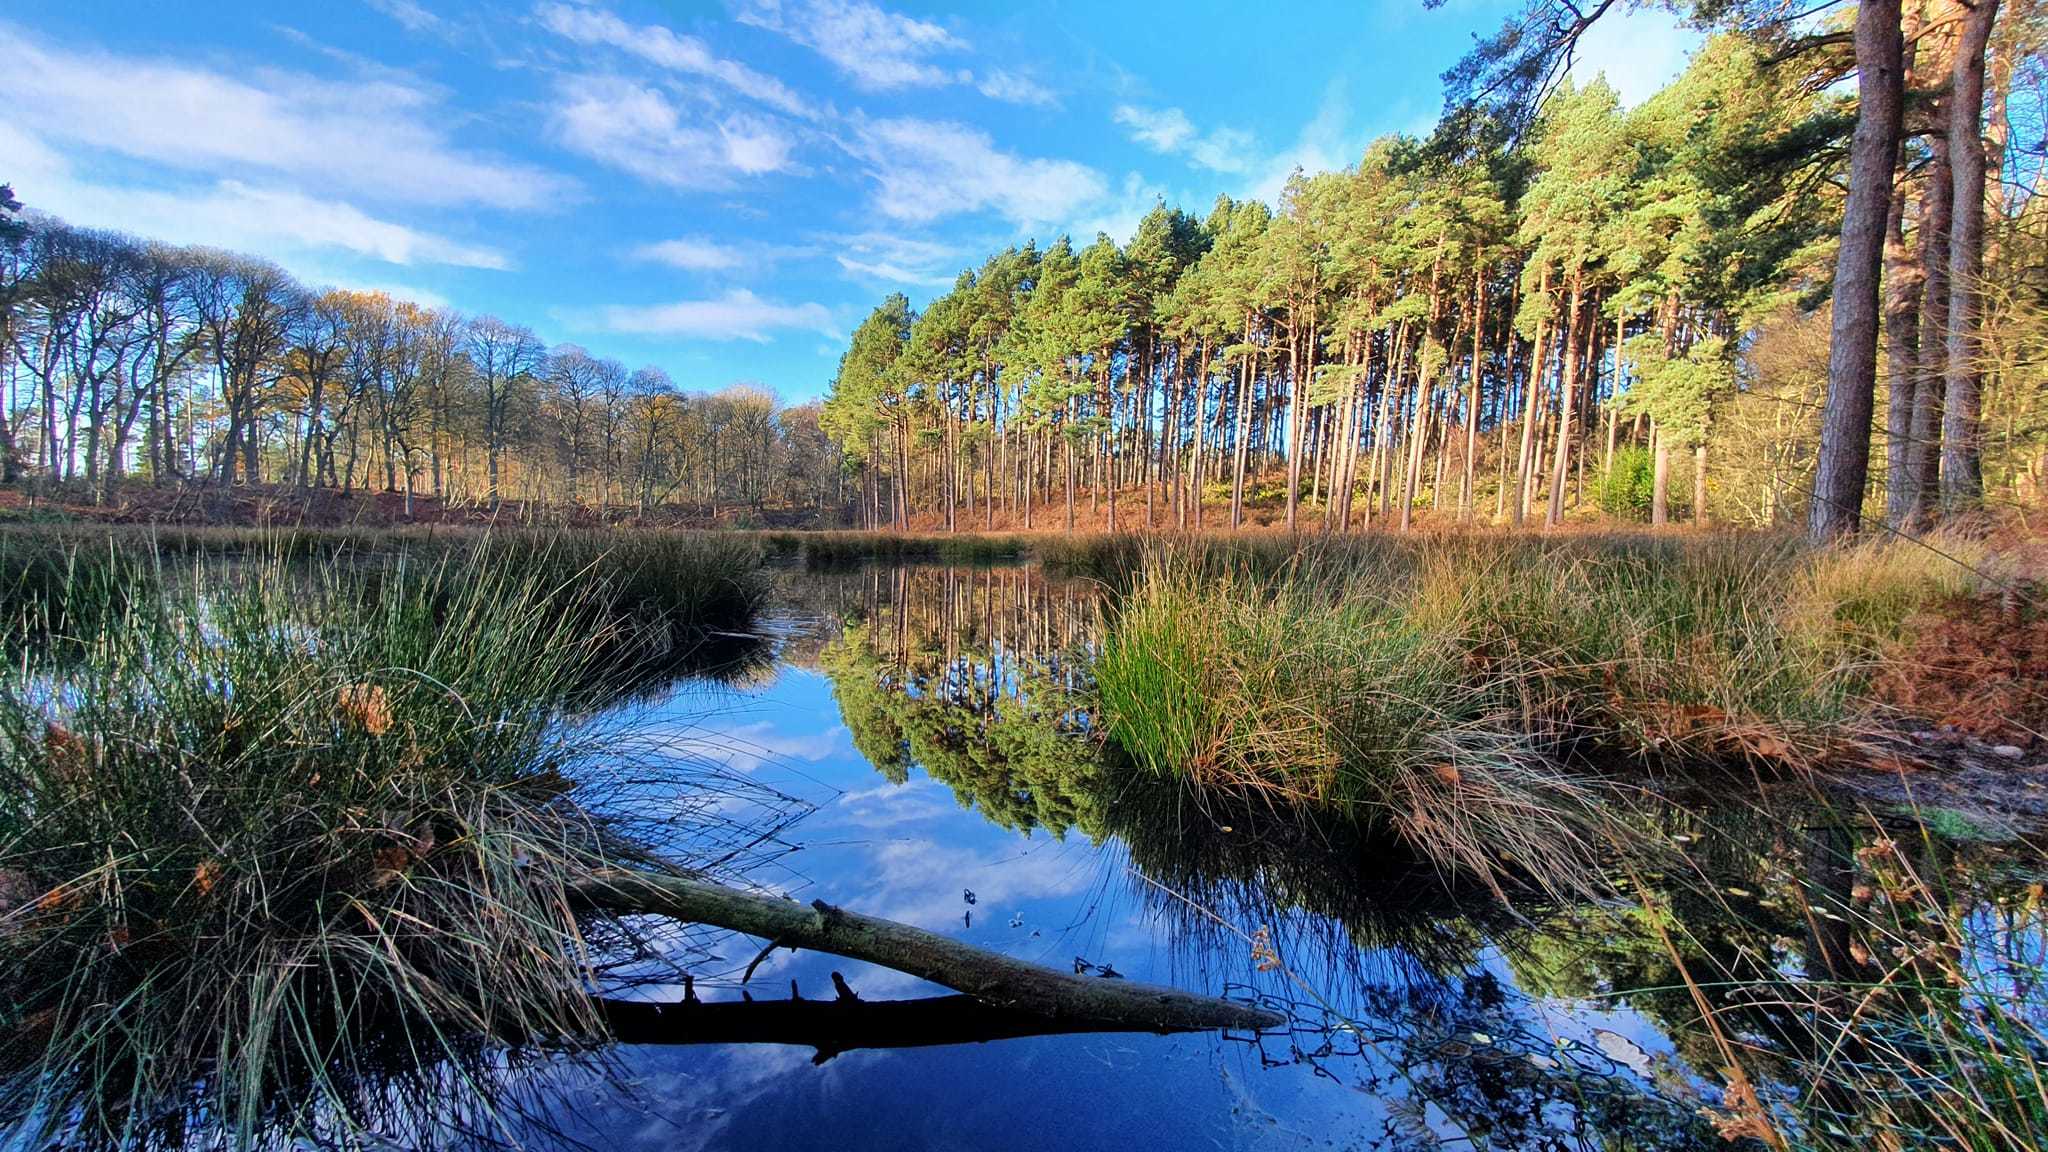 Delamere by Paul Minshall